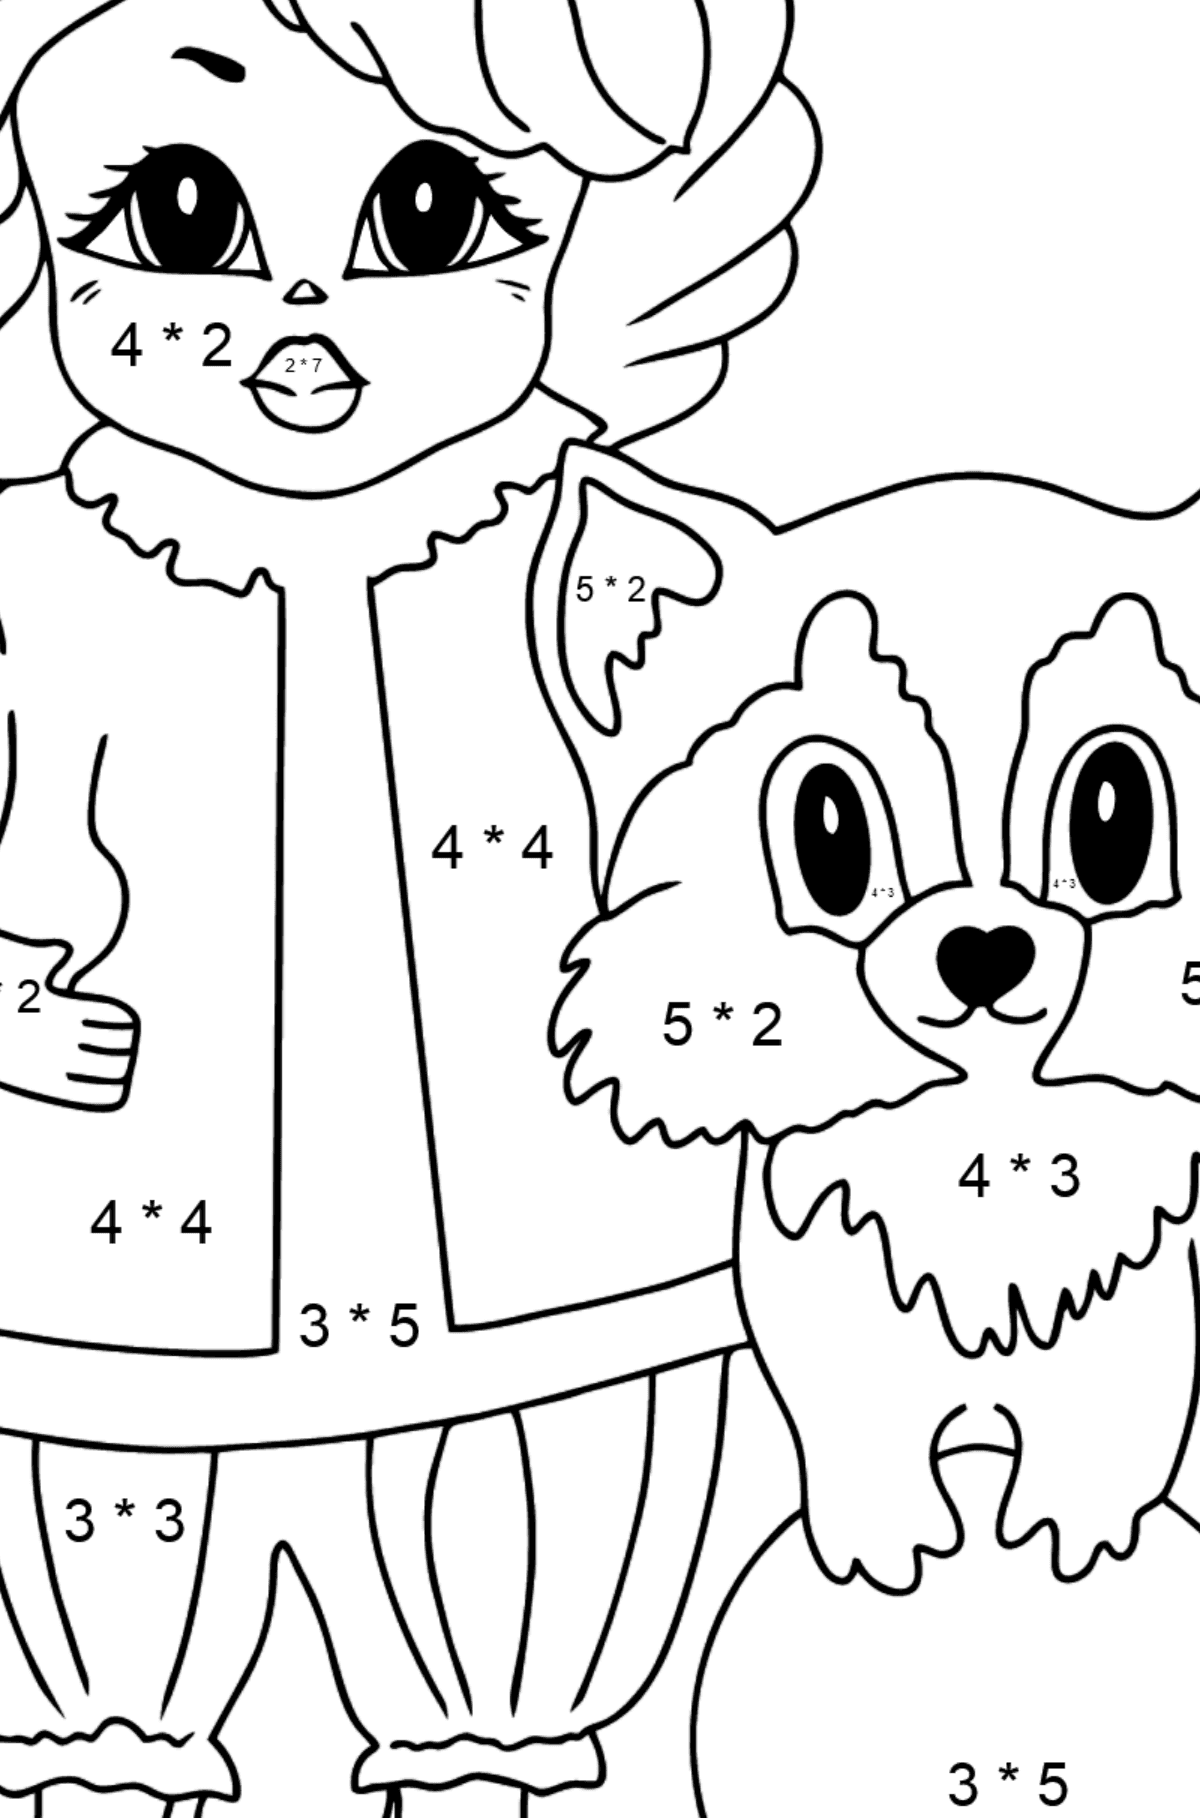 Coloring Picture - A Princess with a Cat and a Racoon - Math Coloring - Multiplication for Kids